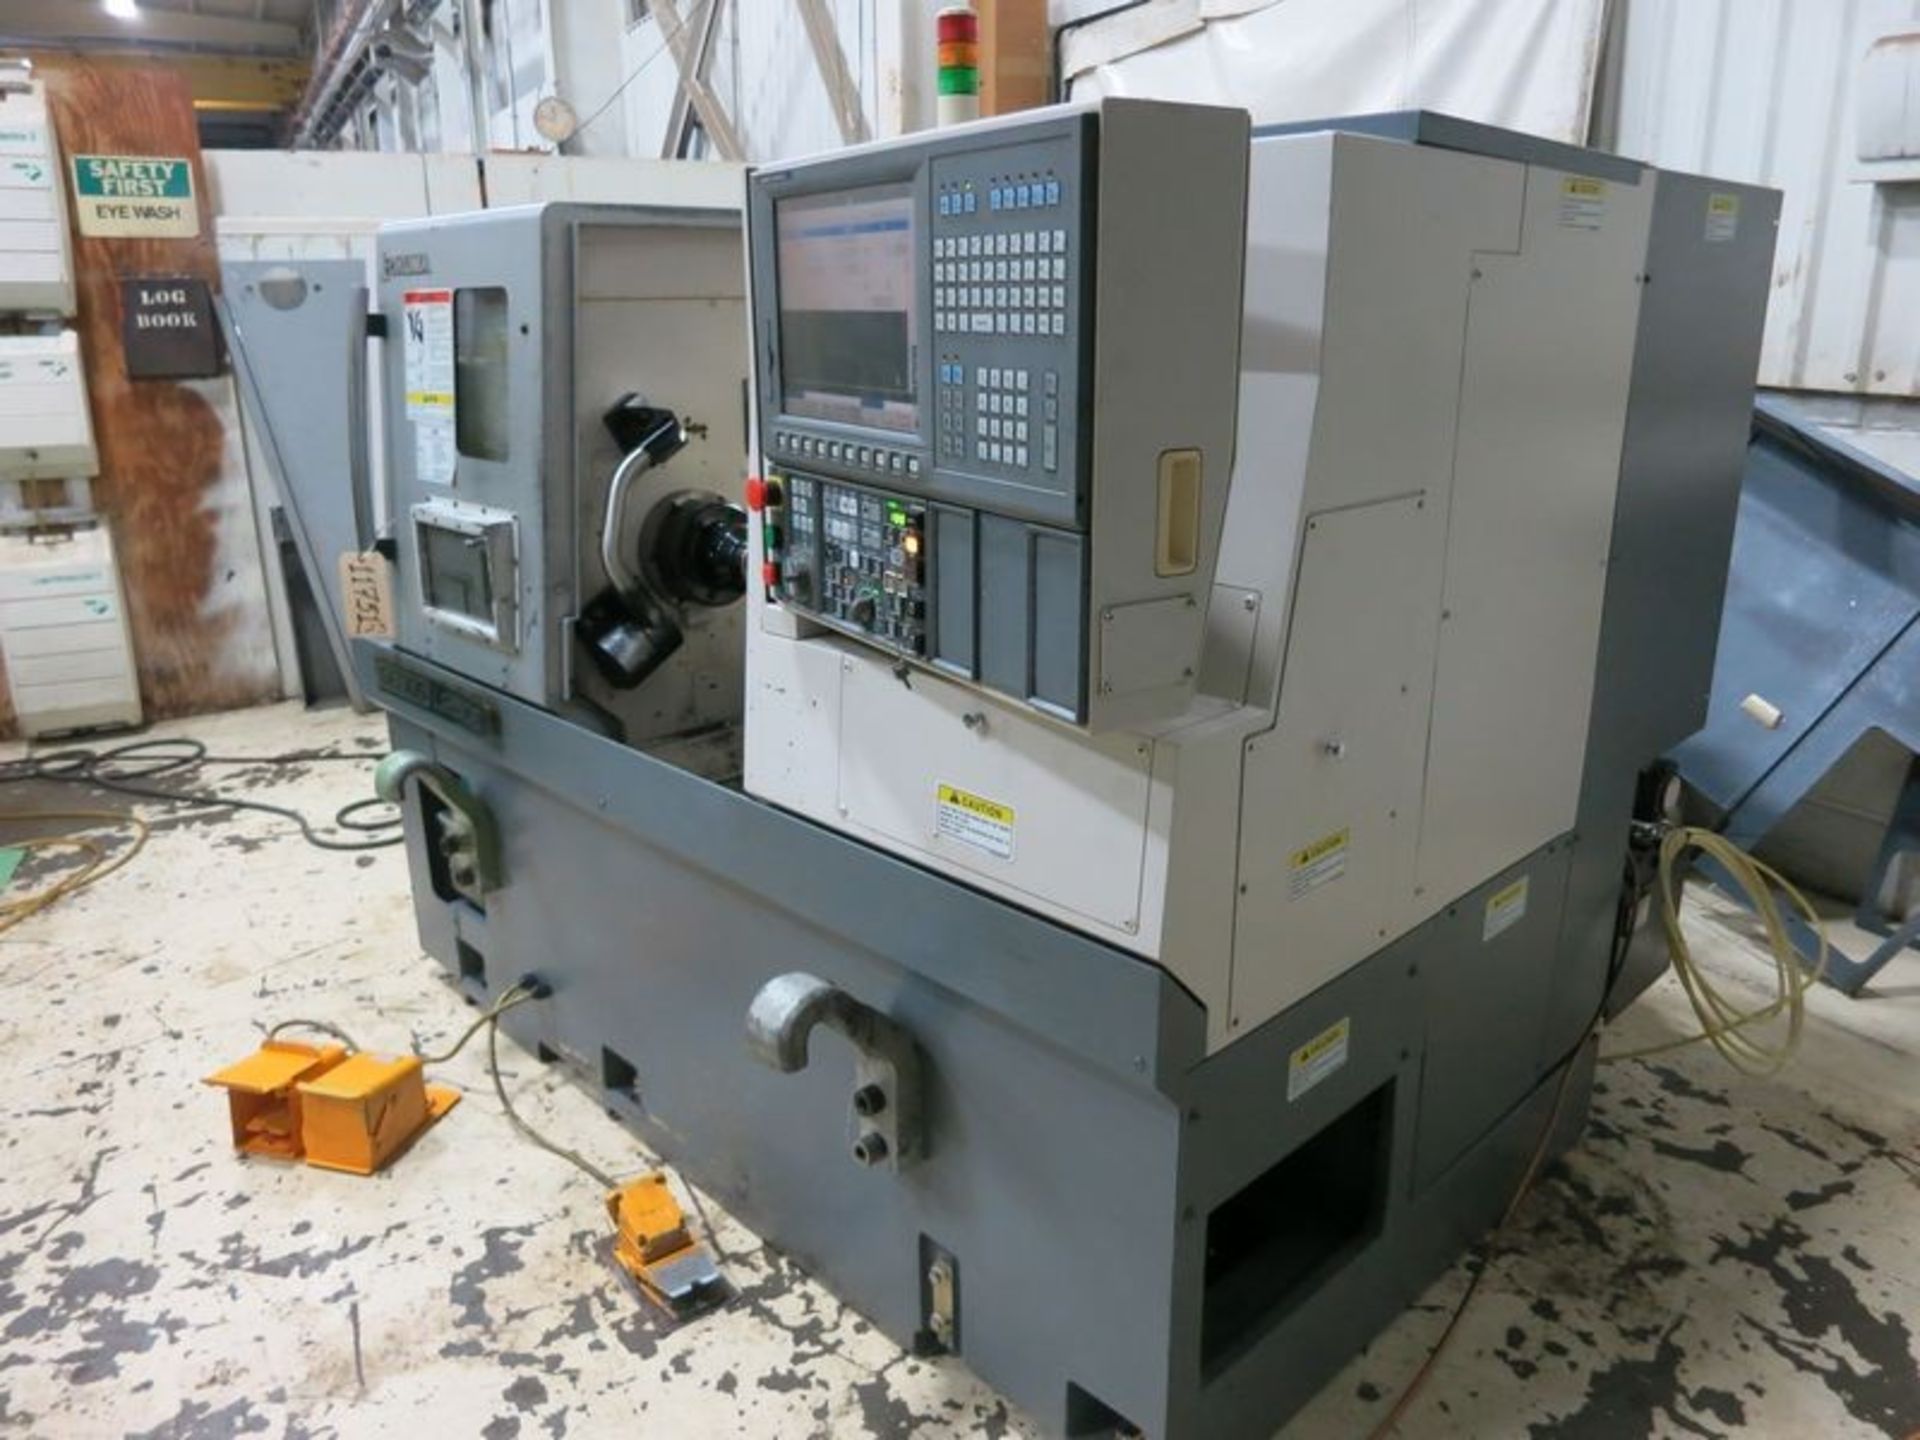 Okuma Genos L250E 2-Axis CNC Turning Center Lathe, S/N C3115, New 2011 General Specifications, Swing - Image 9 of 9